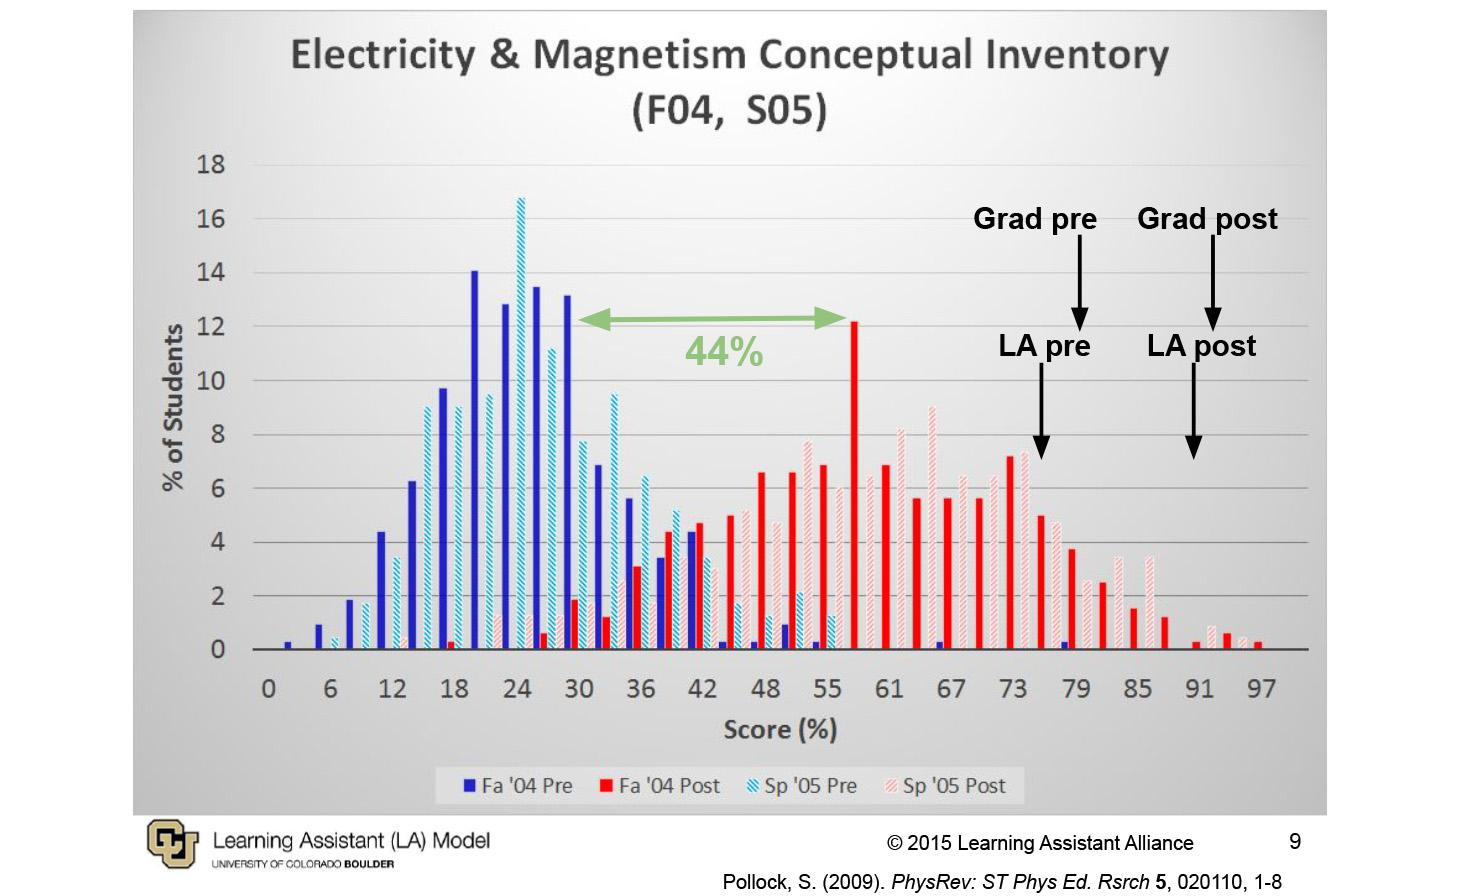 Graph showing an electricity and magnetism conceptual inventory